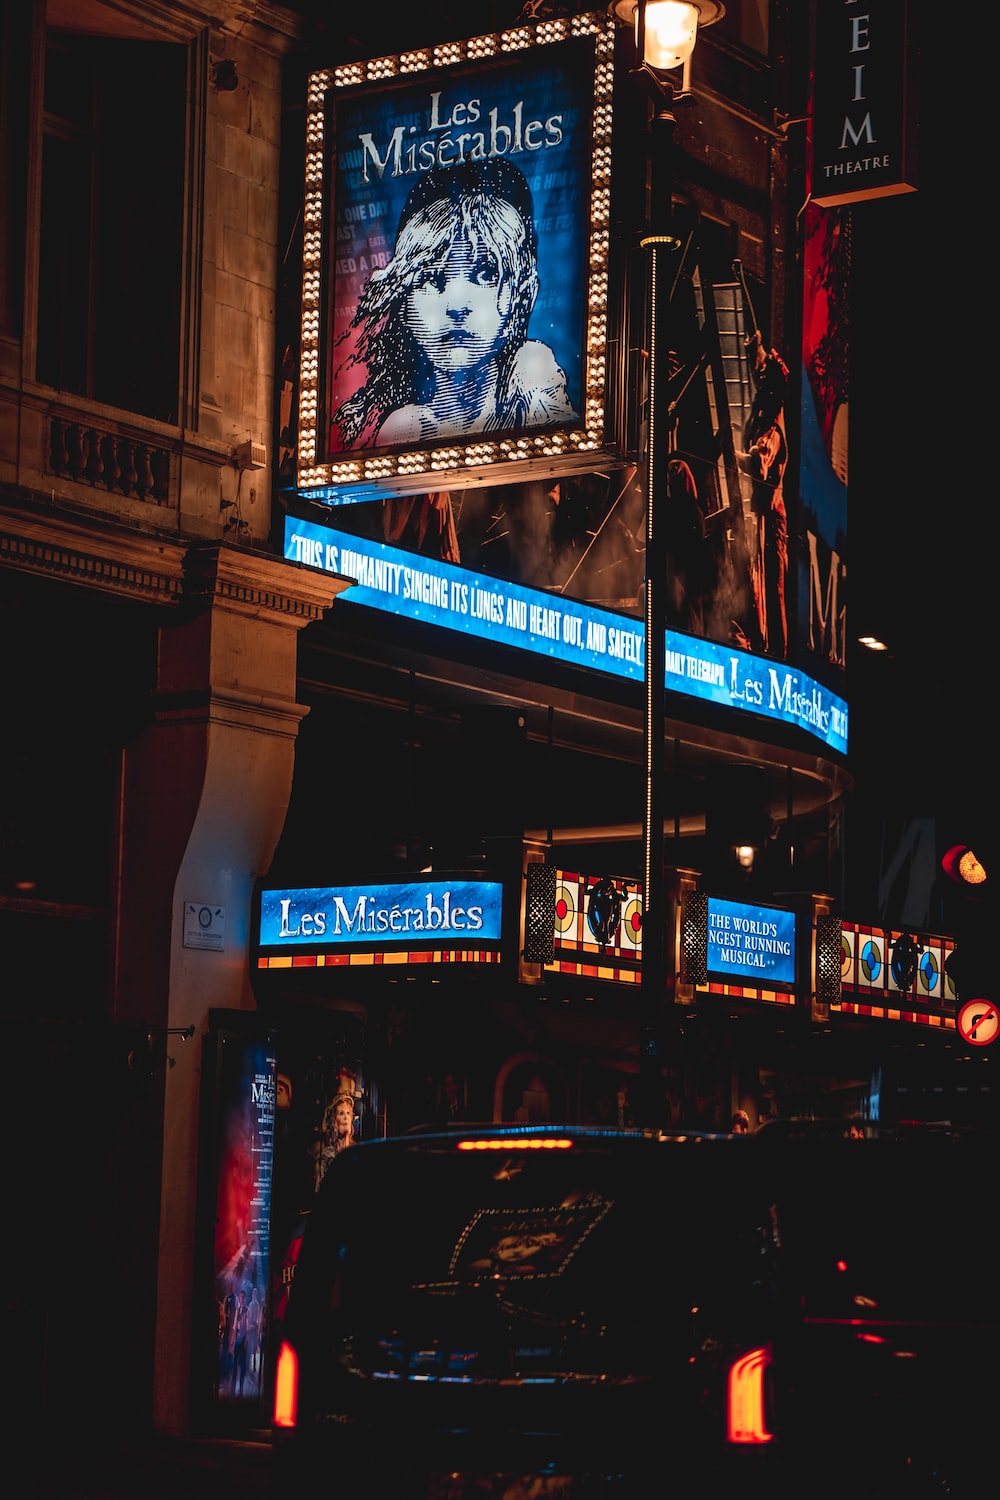 Les miserables pictures download free images on